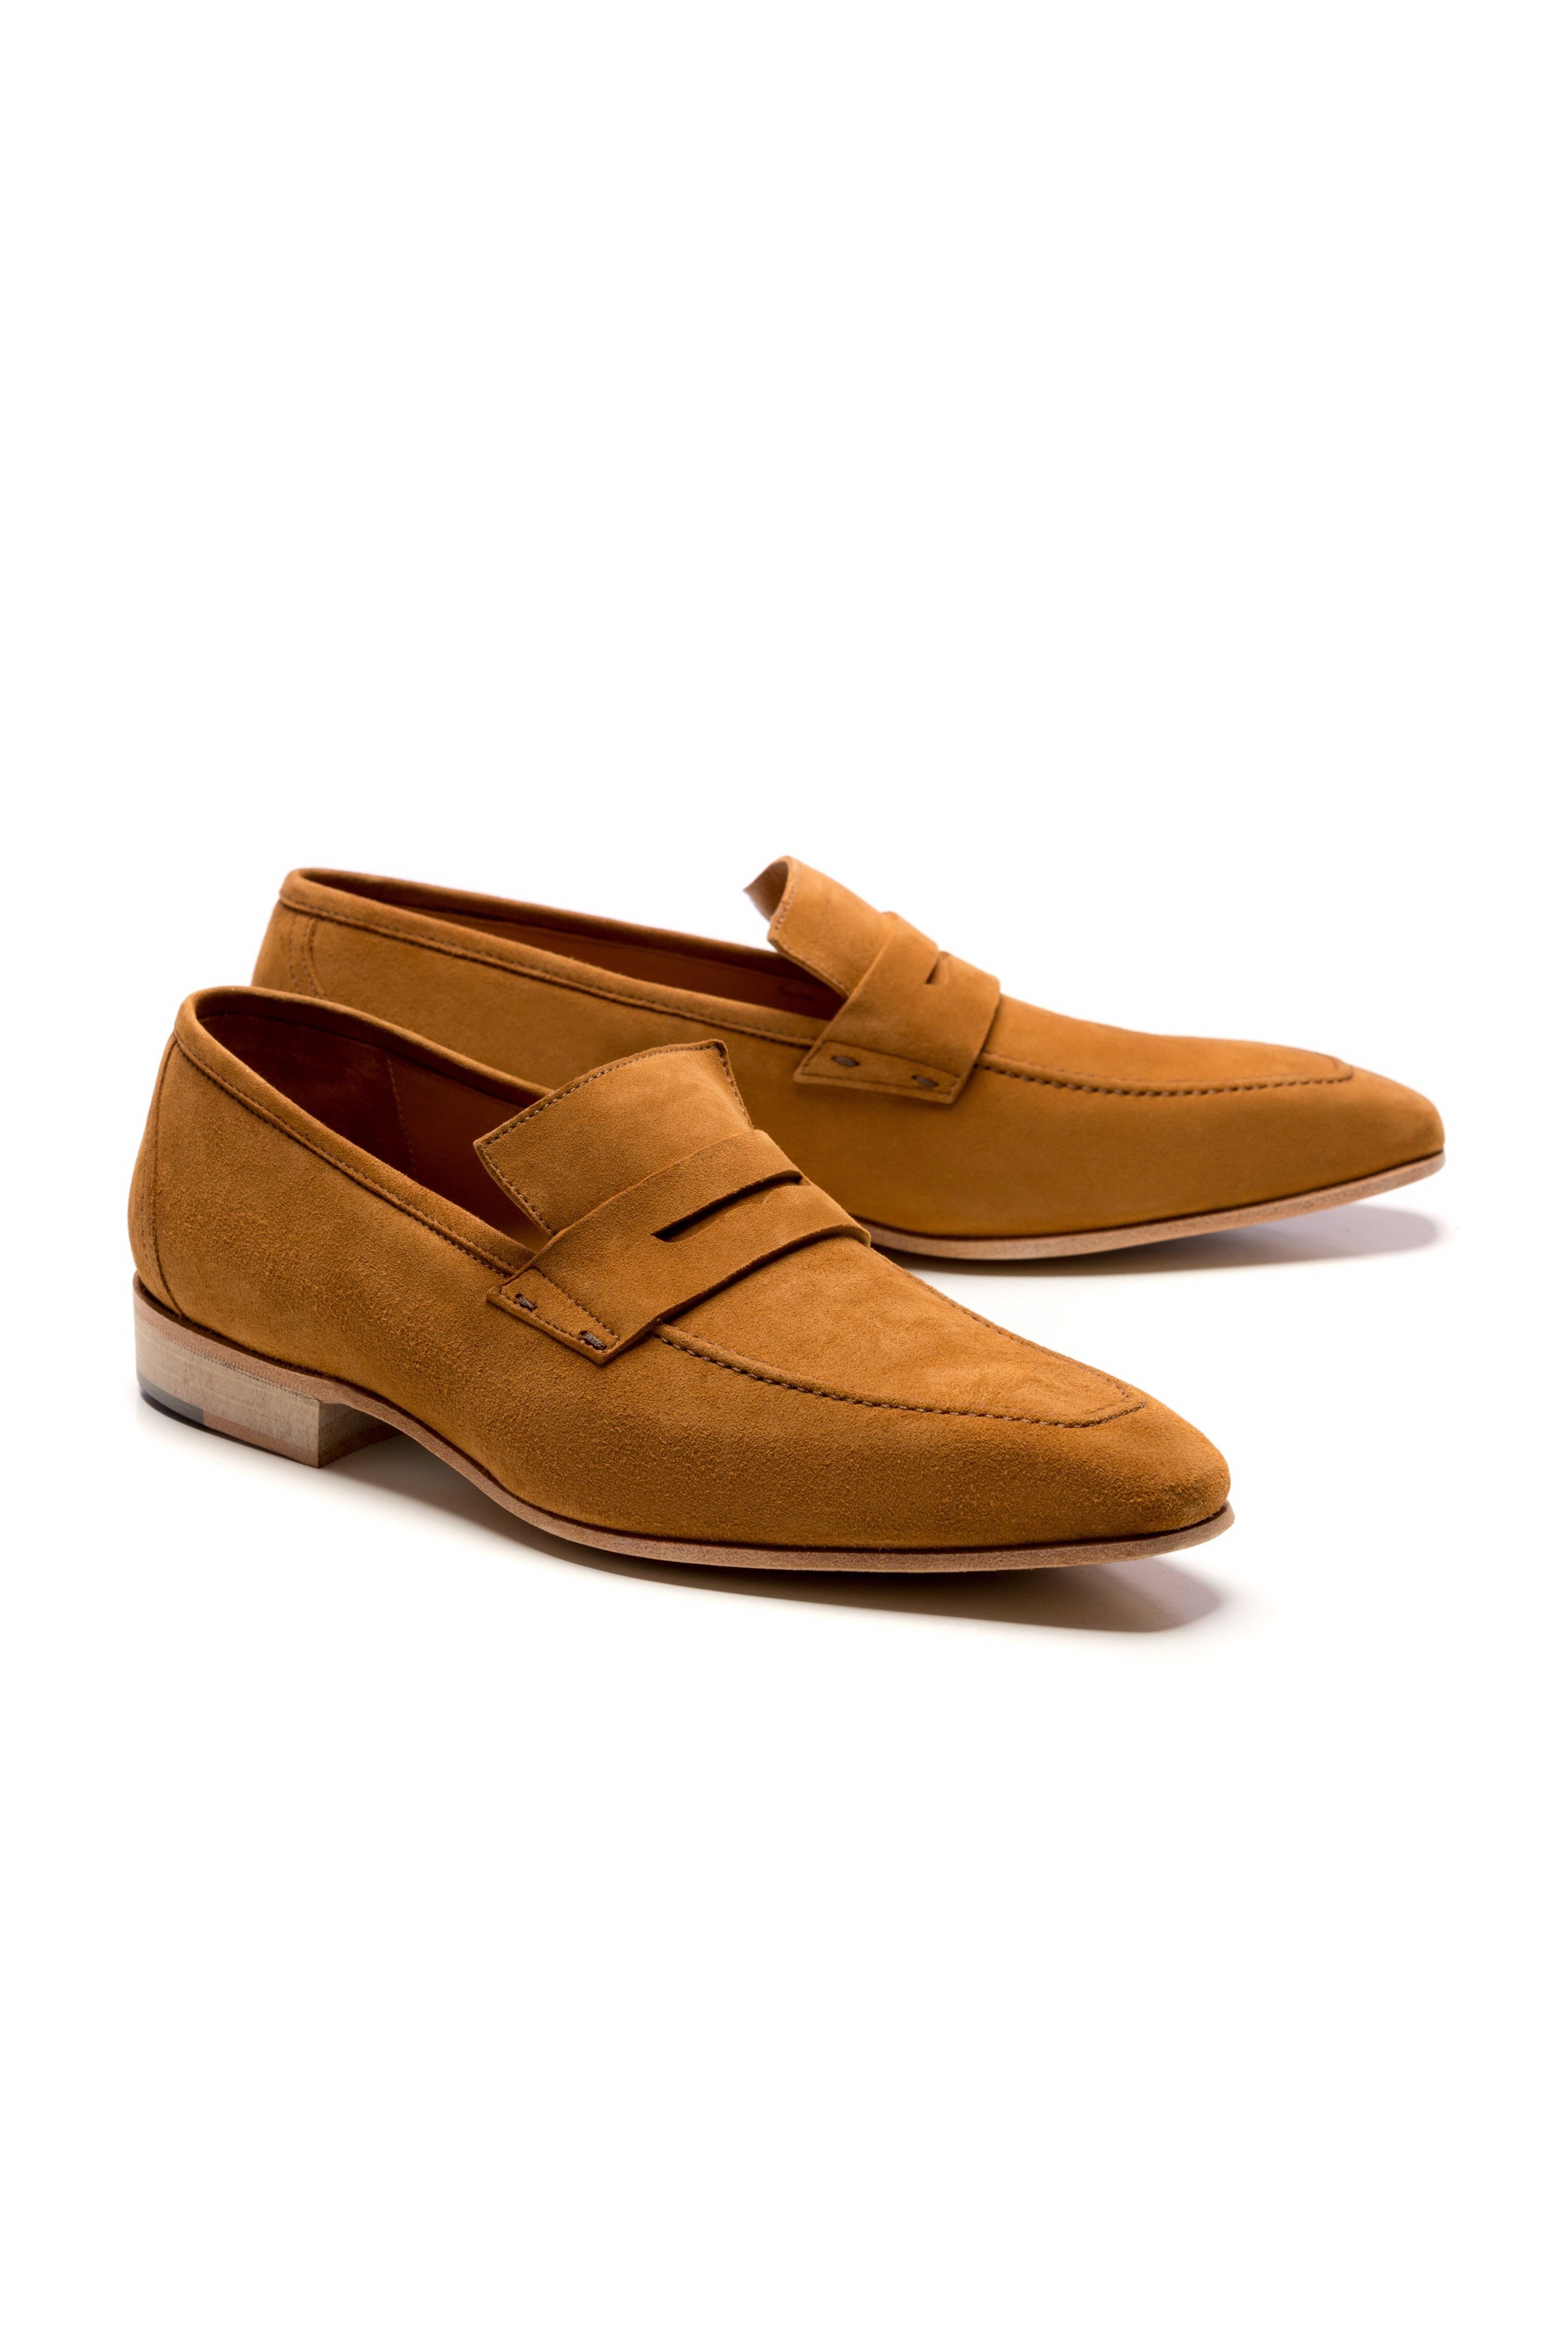 Brown suede penny loafers